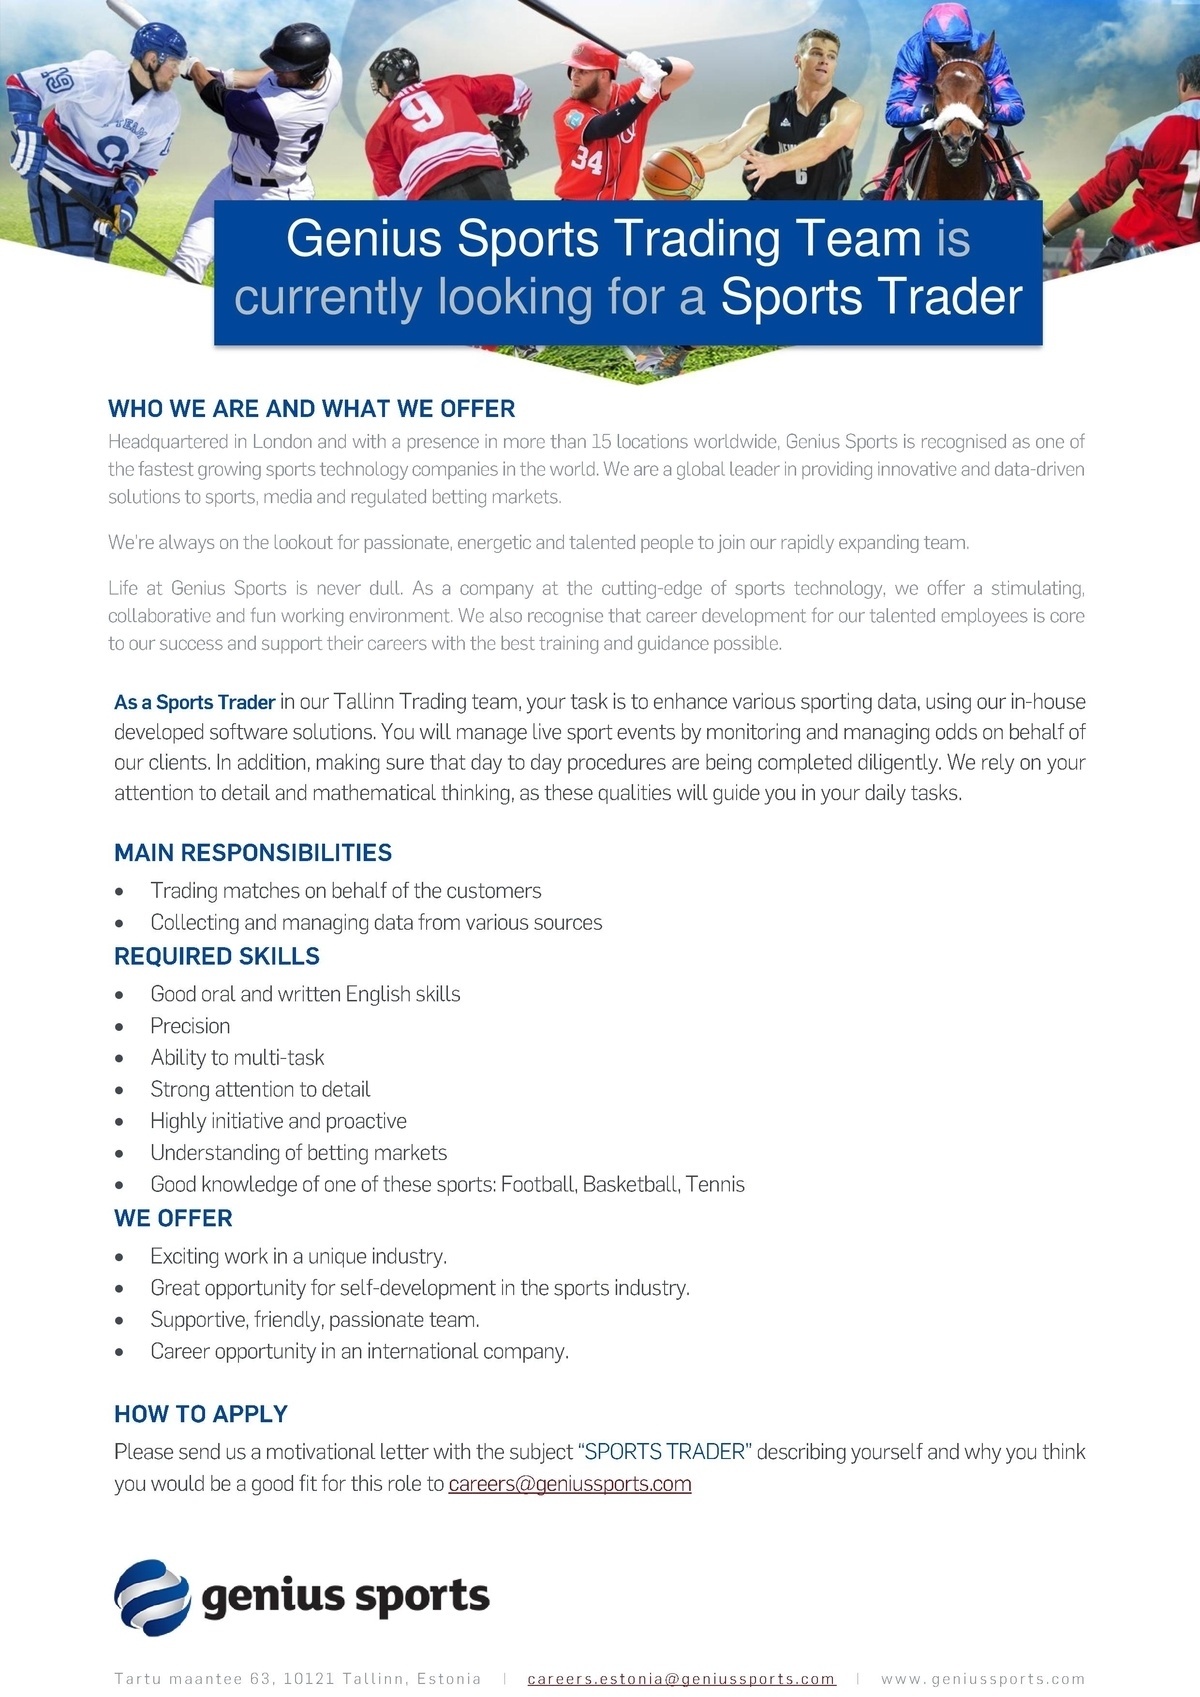 GENIUS SPORTS SERVICES EESTI OÜ SPORTS TRADER (FULL-TIME)